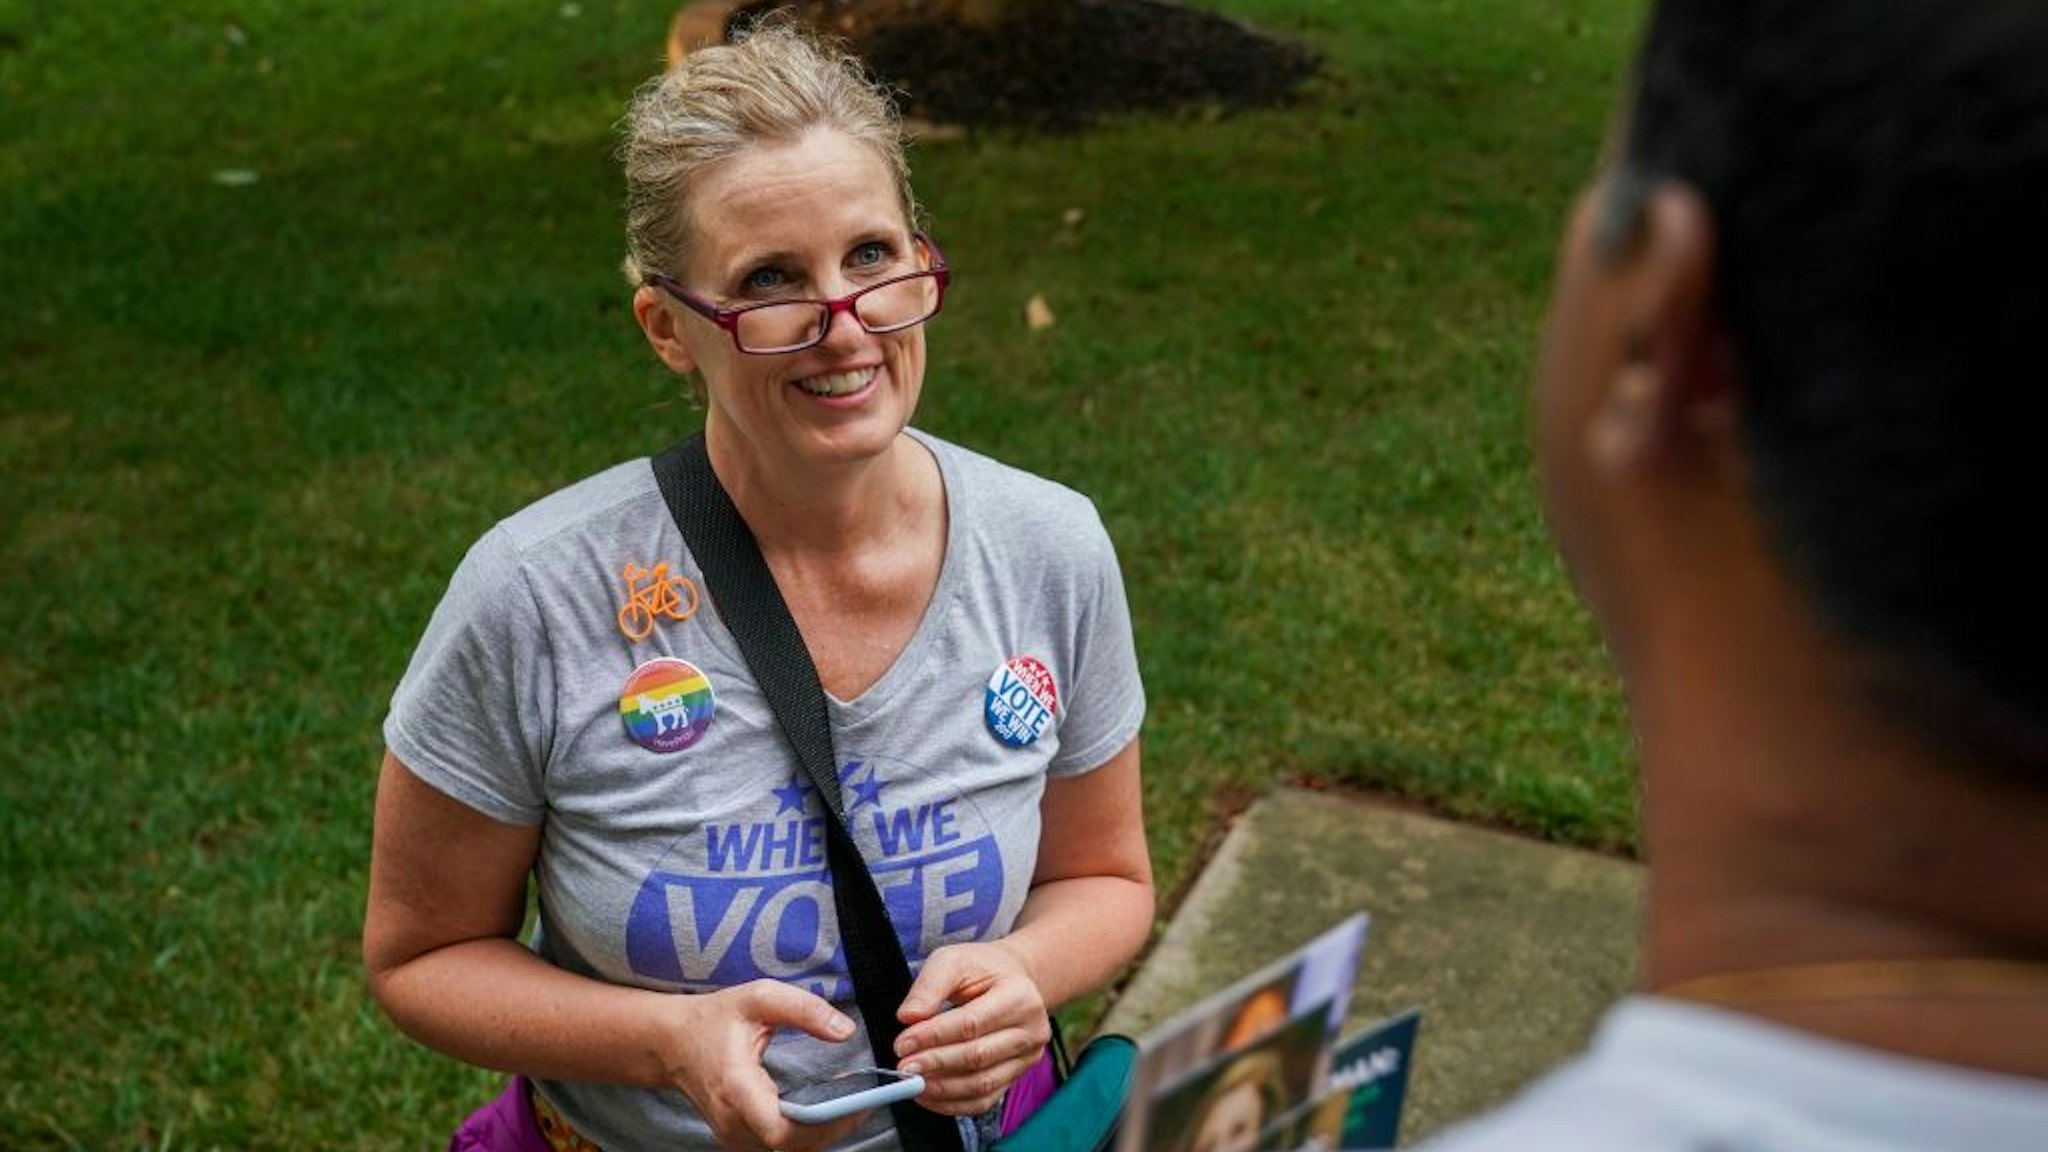 Juli Briskman, the Democratic nominee for Supervisor of Loudoun County's Algonkian District, chats with Hari Moosani as she campaigns door-to-door in her neighborhood on Wednesday, July 17, 2019, in Sterling, VA.